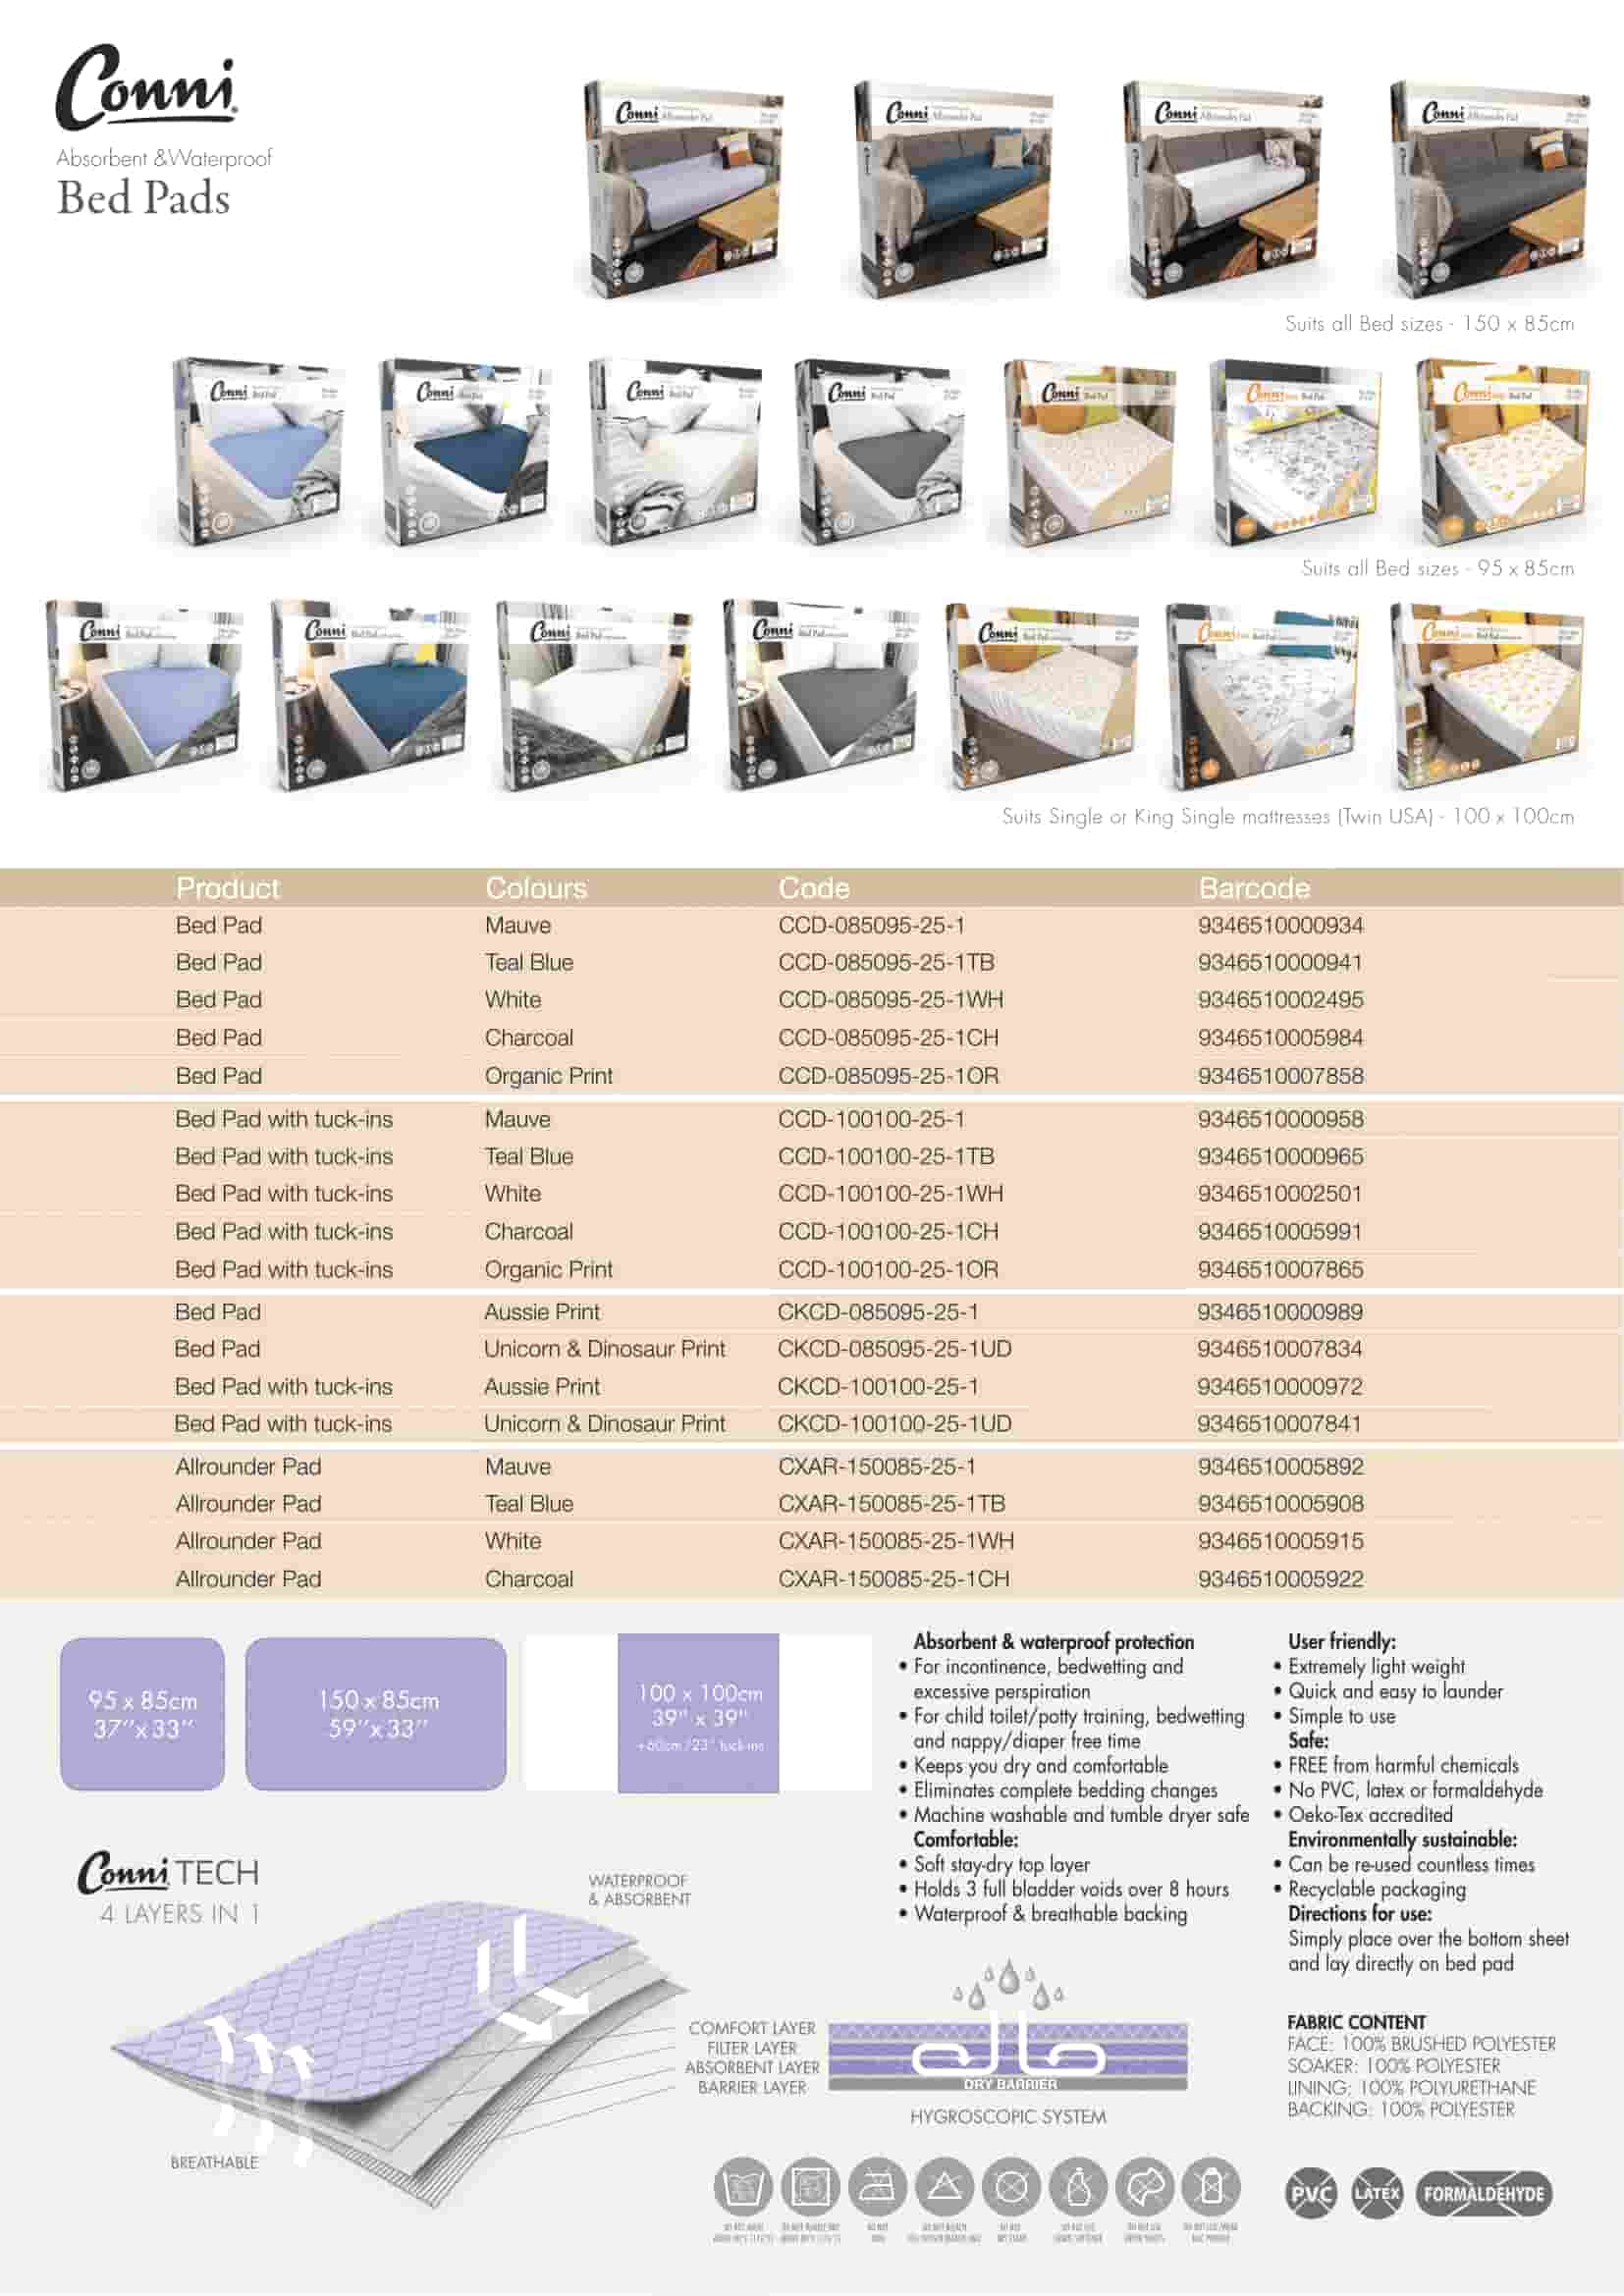 Conni Bed pad specifications download